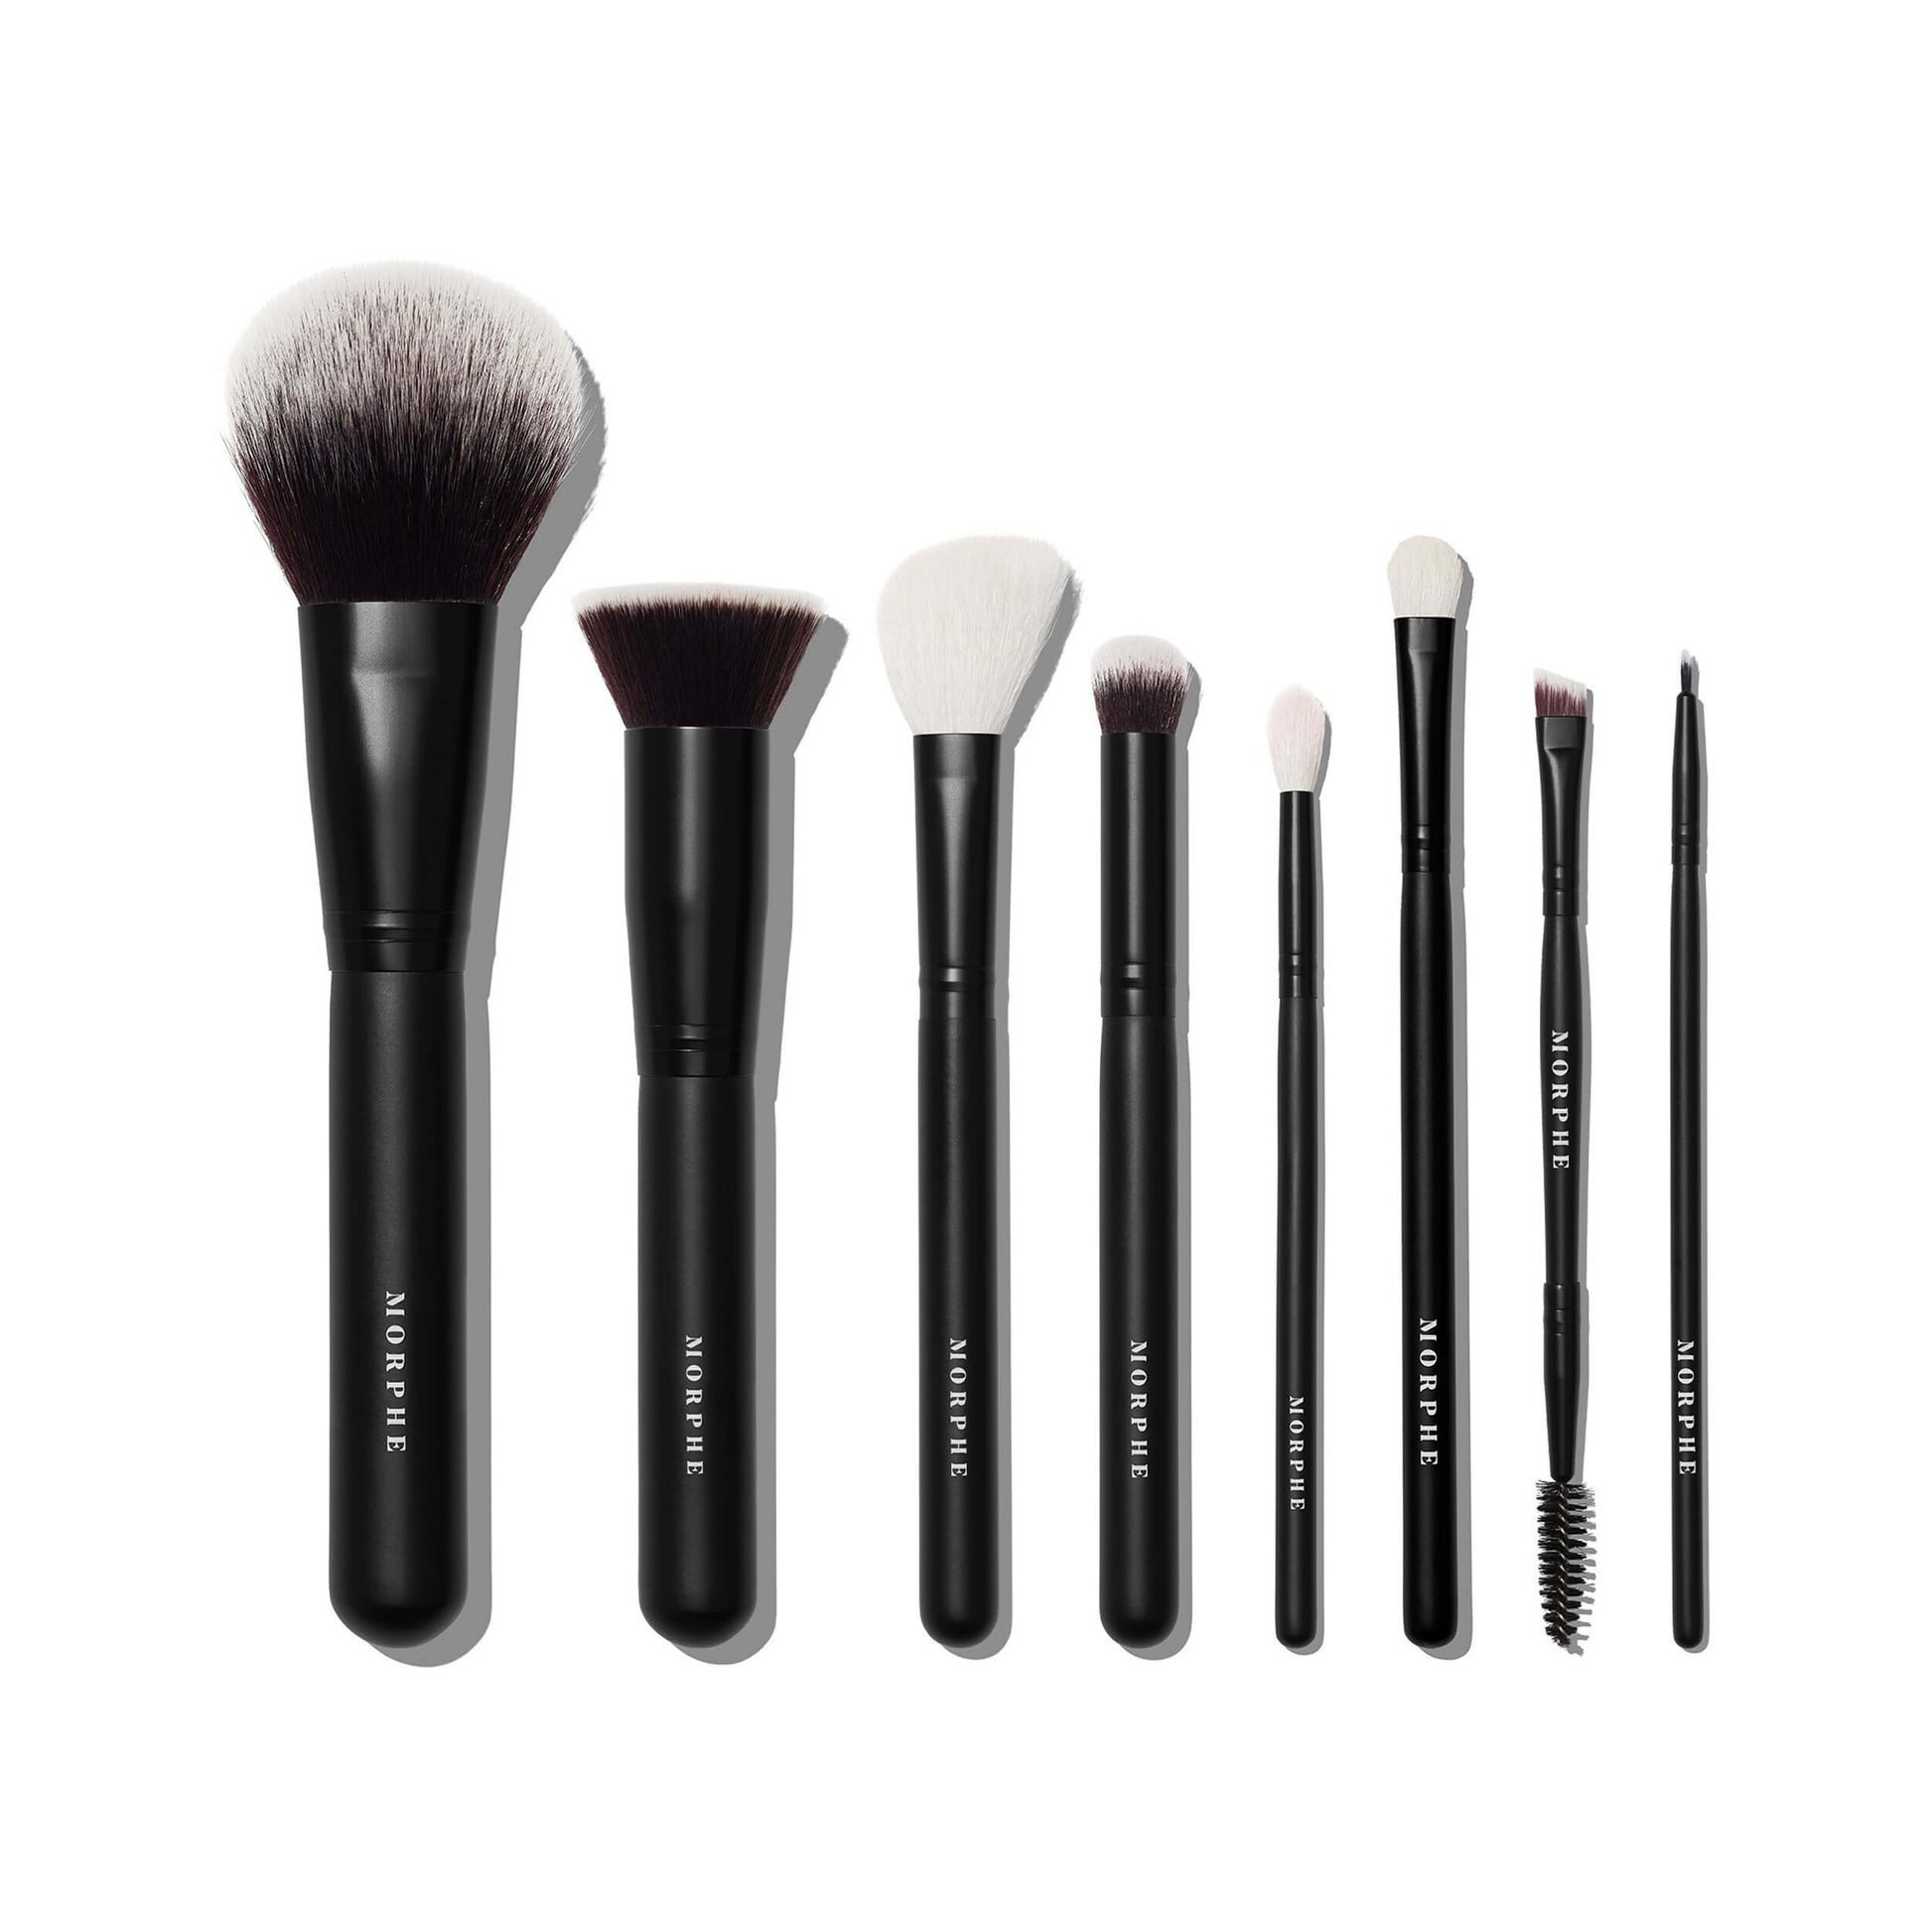 Morphe Cosmetics Get Things Started Brush Collection